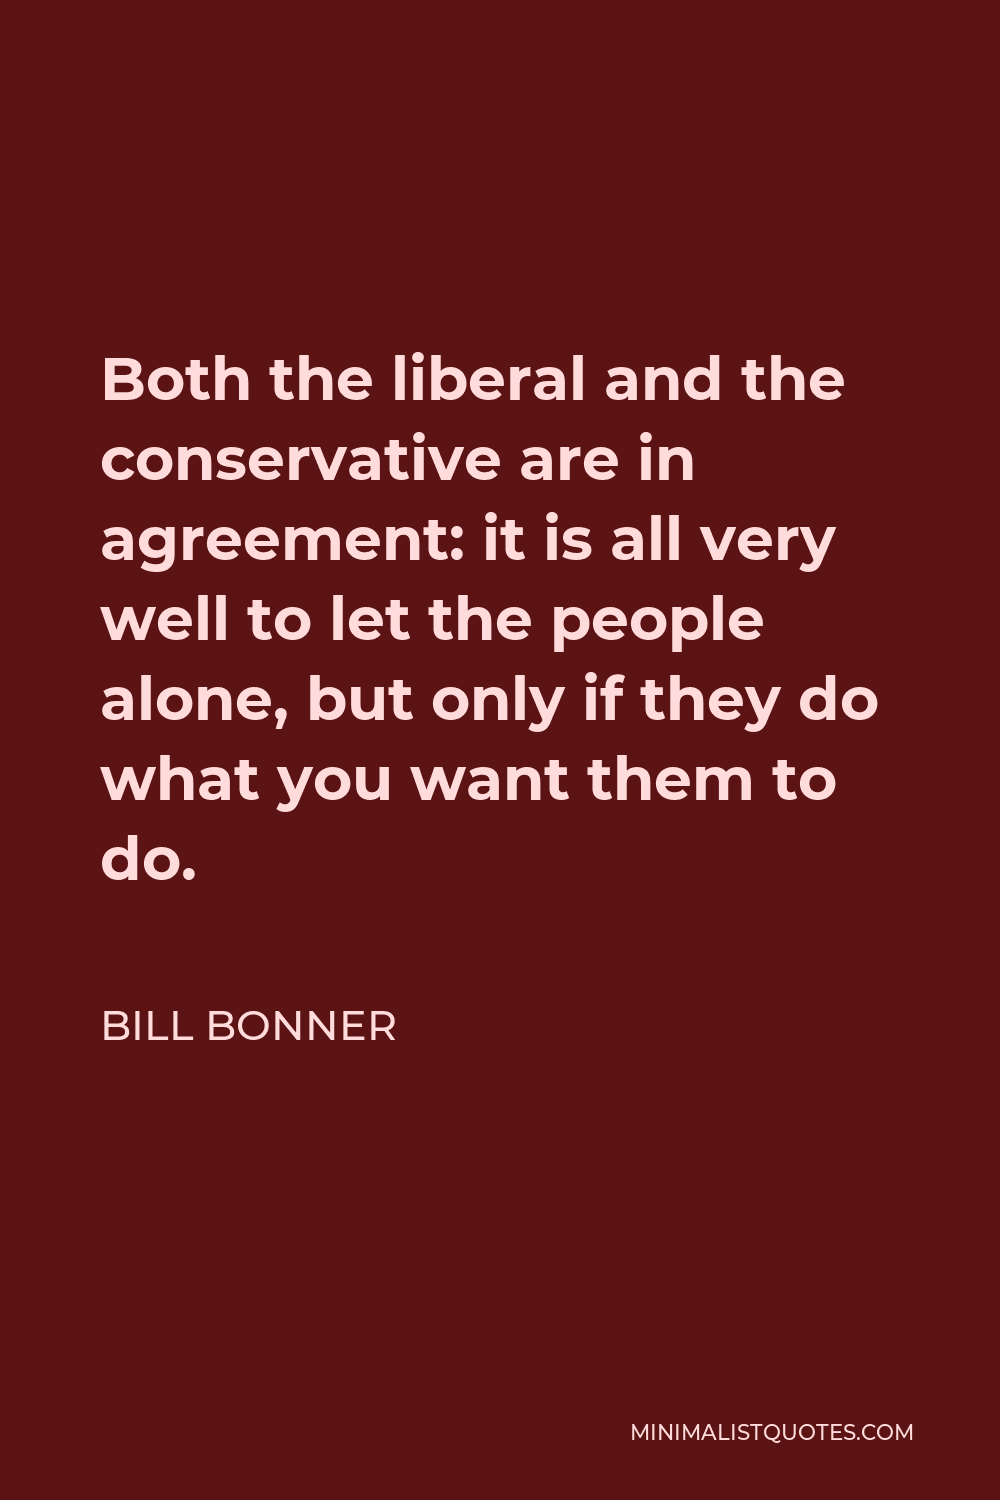 Bill Bonner Quote - Both the liberal and the conservative are in agreement: it is all very well to let the people alone, but only if they do what you want them to do.